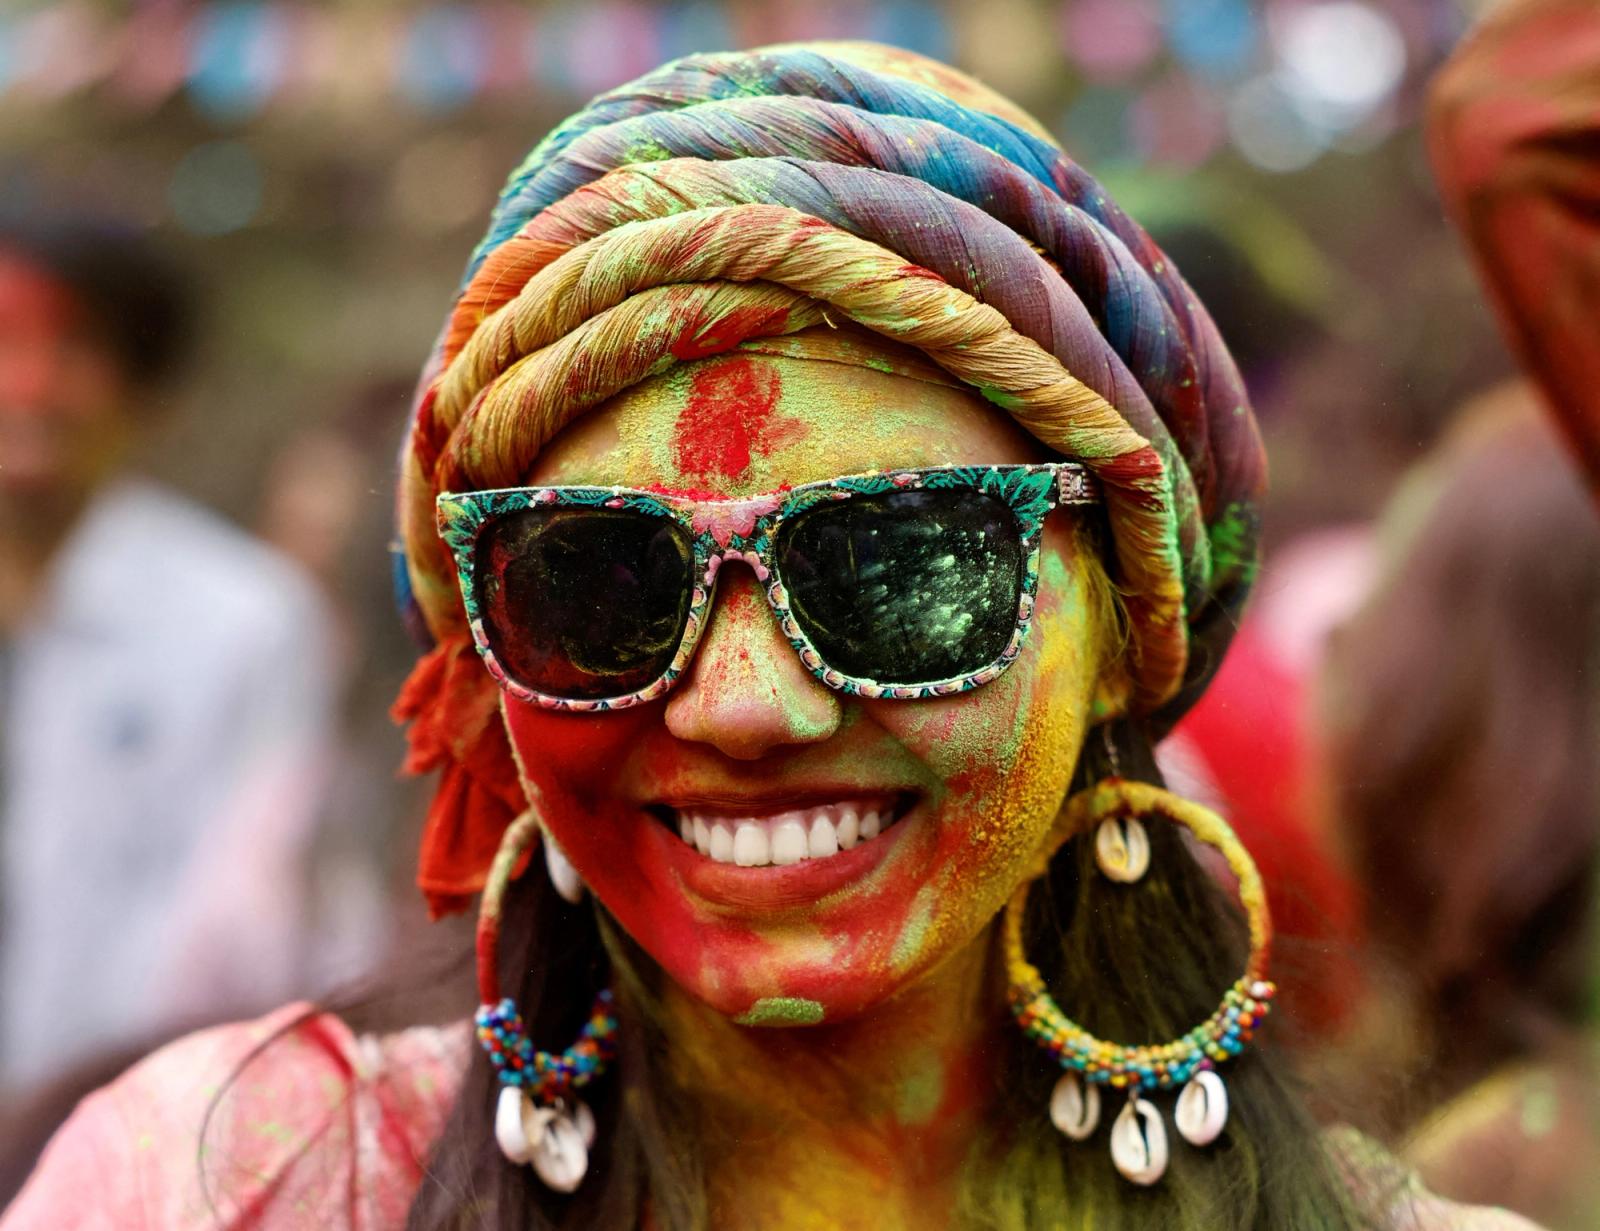 A girl smiles during the celebration of Holi at the Art Department of the University of Dhaka in Dhaka, Bangladesh, March 8, 2023. REUTERS/Mohammad Ponir Hossain